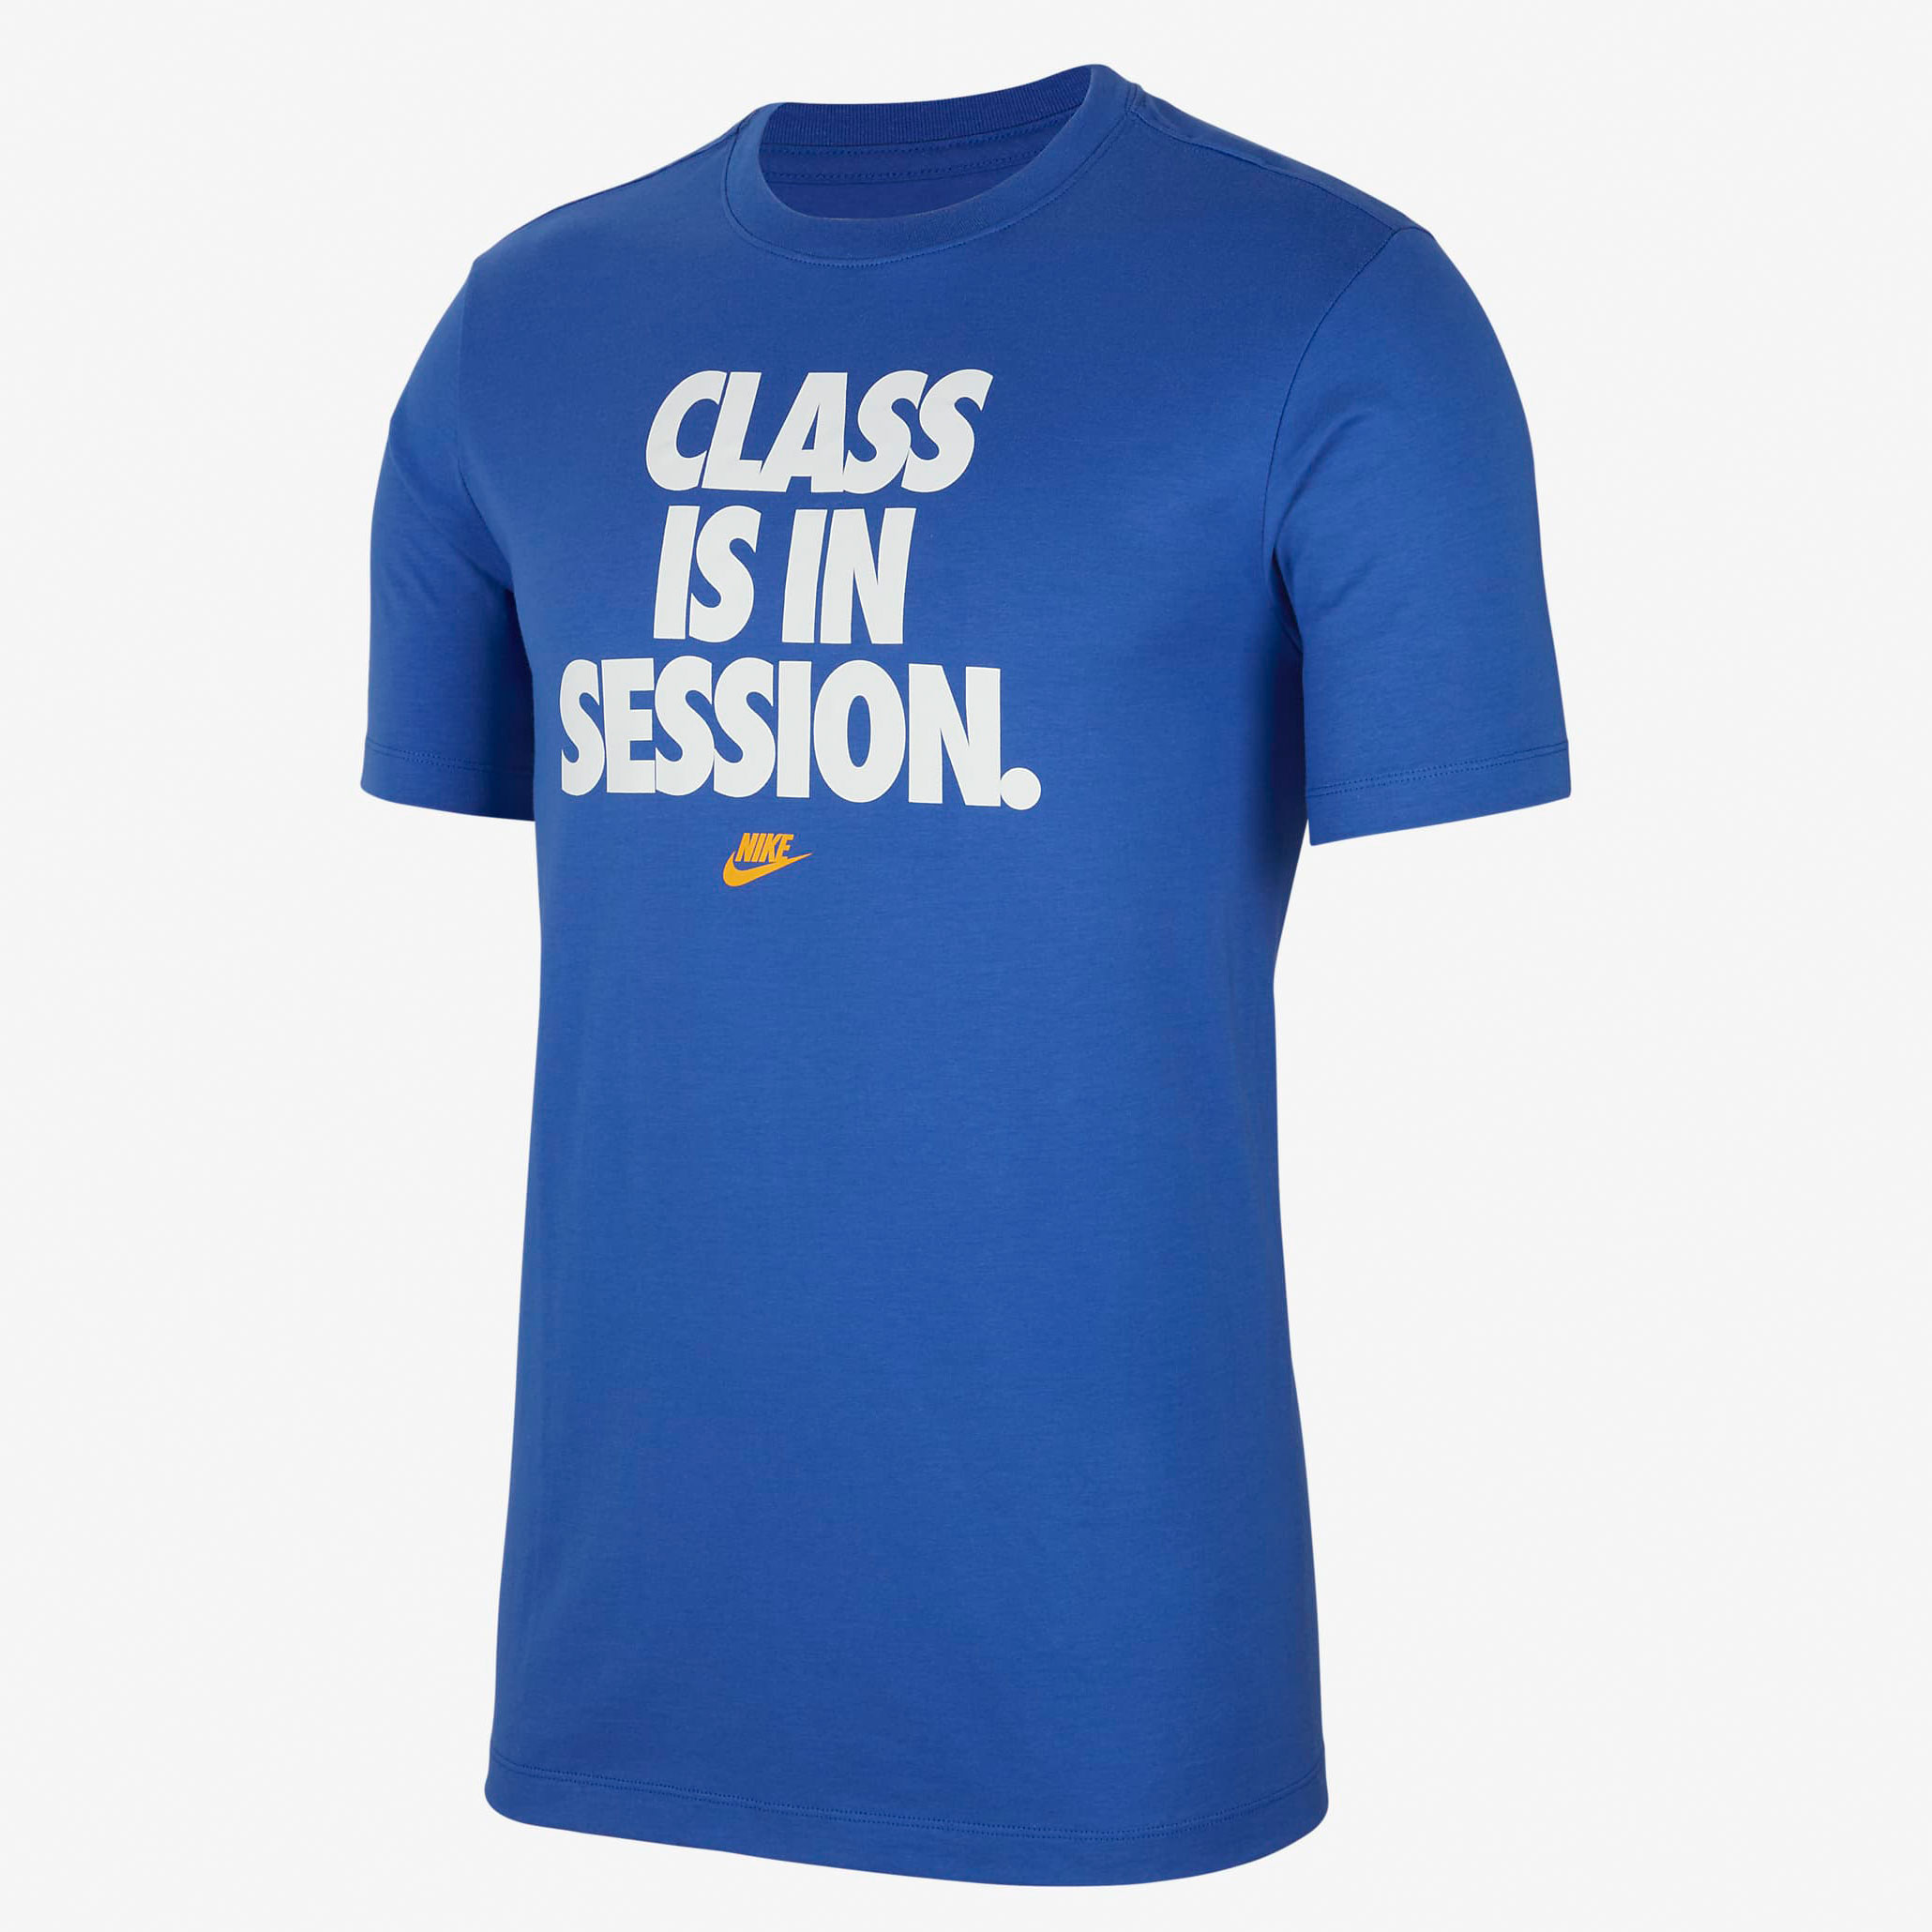 nike-class-is-in-session-shirt-blue